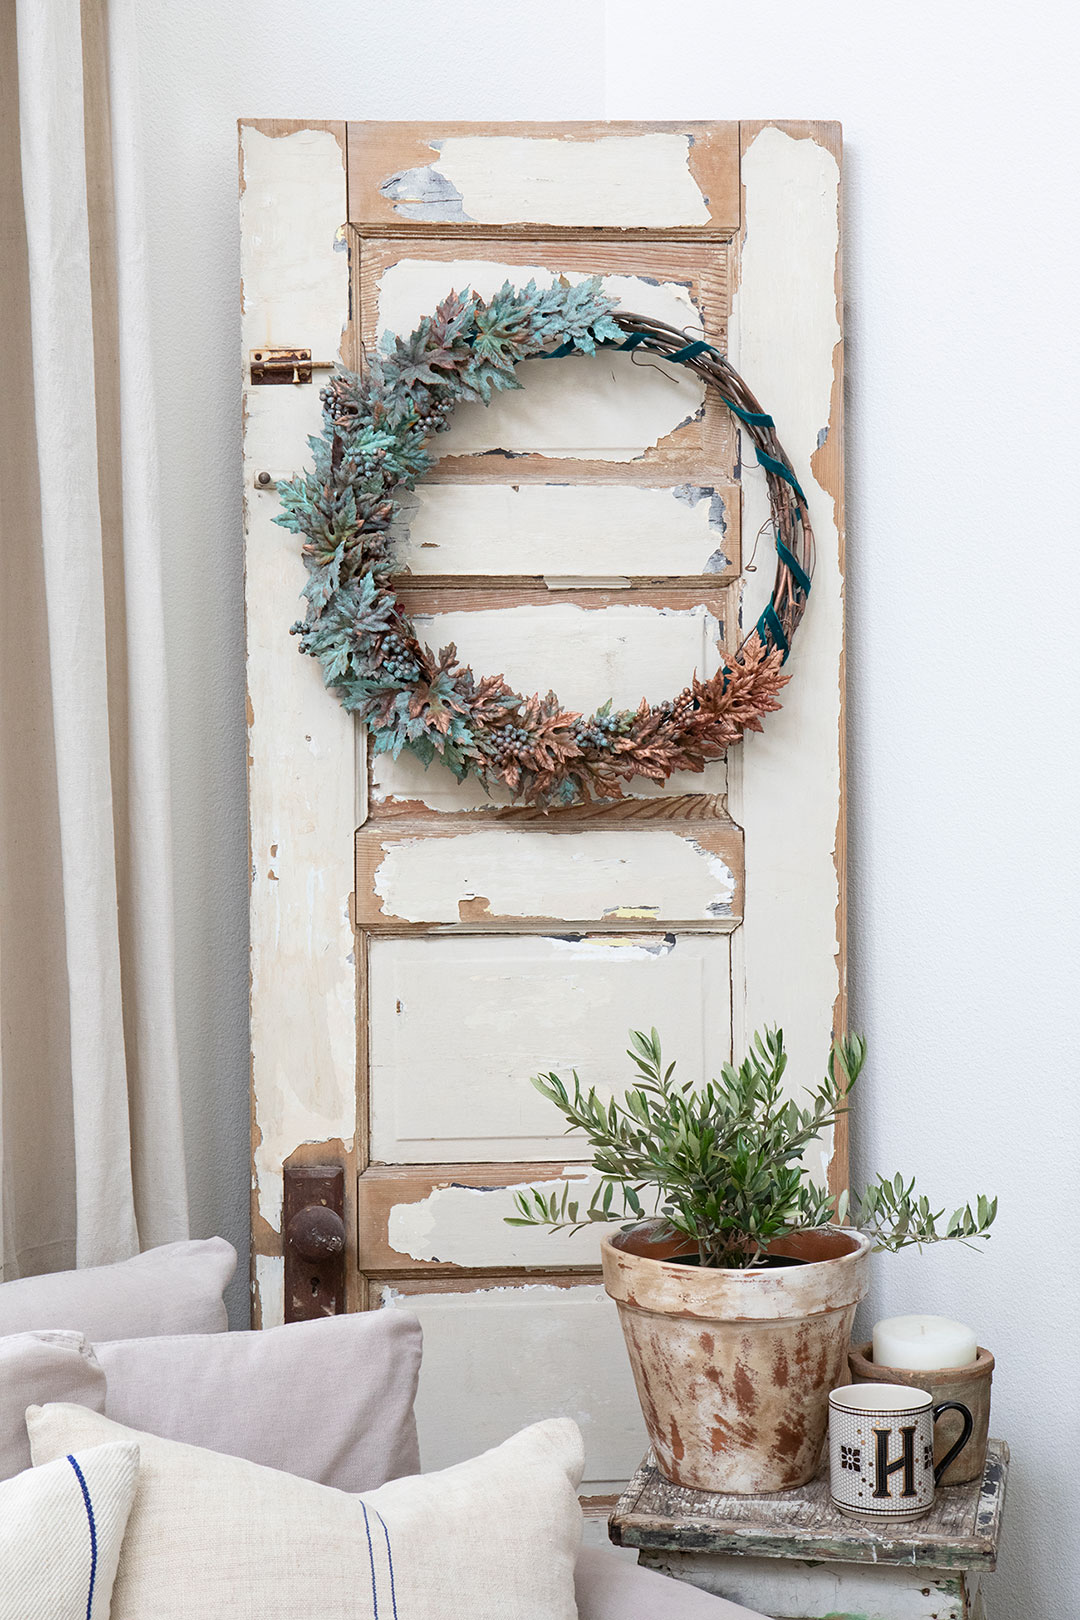 DIY copper patina wreath hung on a white door with chipping paint